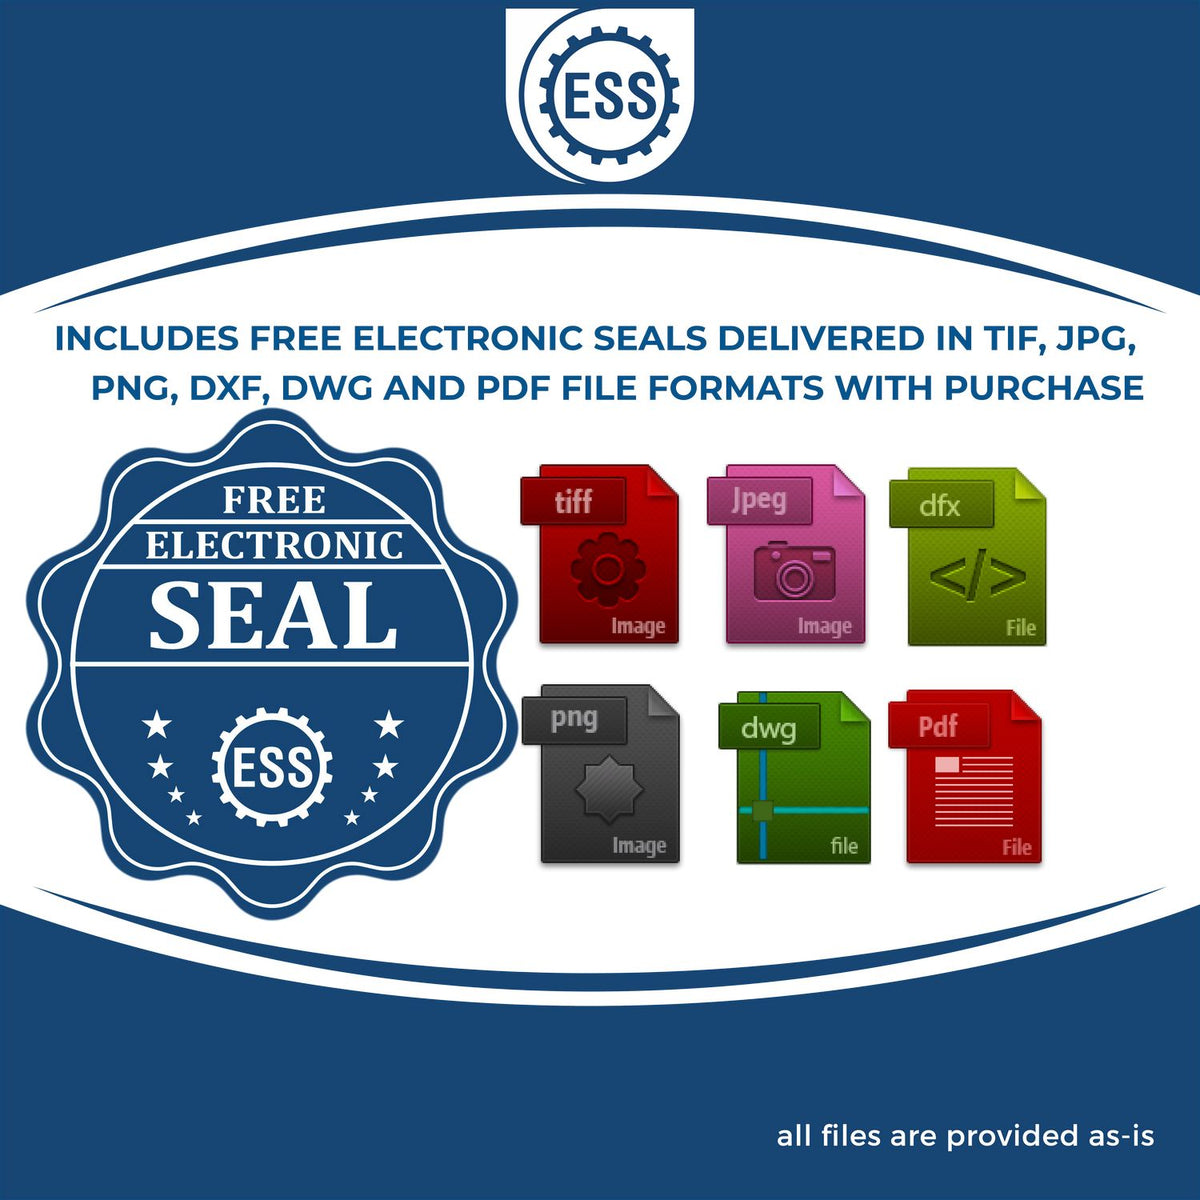 An infographic for the free electronic seal for the Long Reach Maine Geology Seal illustrating the different file type icons such as DXF, DWG, TIF, JPG and PNG.